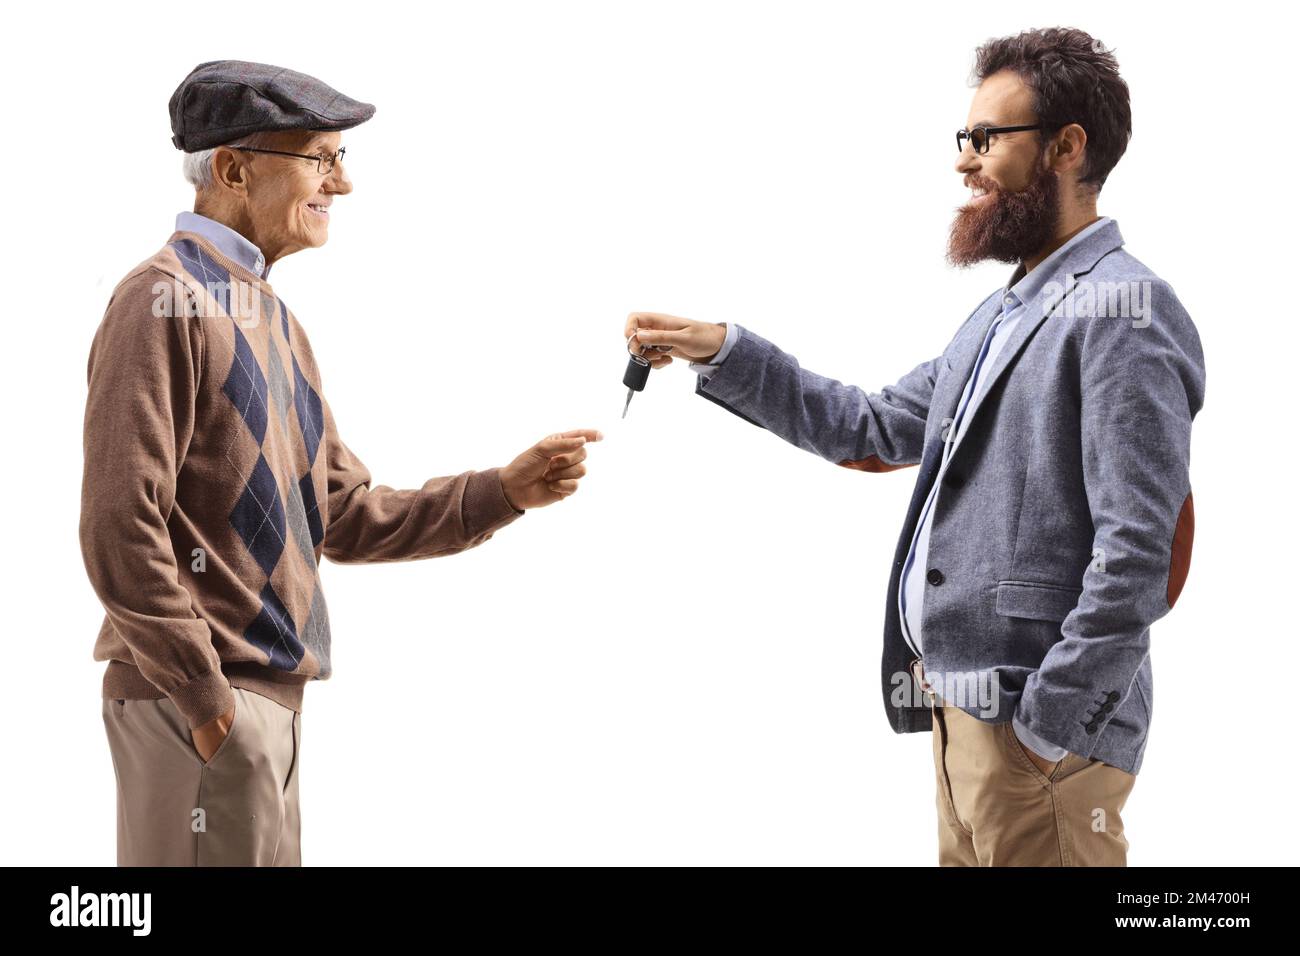 Younger man giving car keys to an elderly man isolated on white background Stock Photo